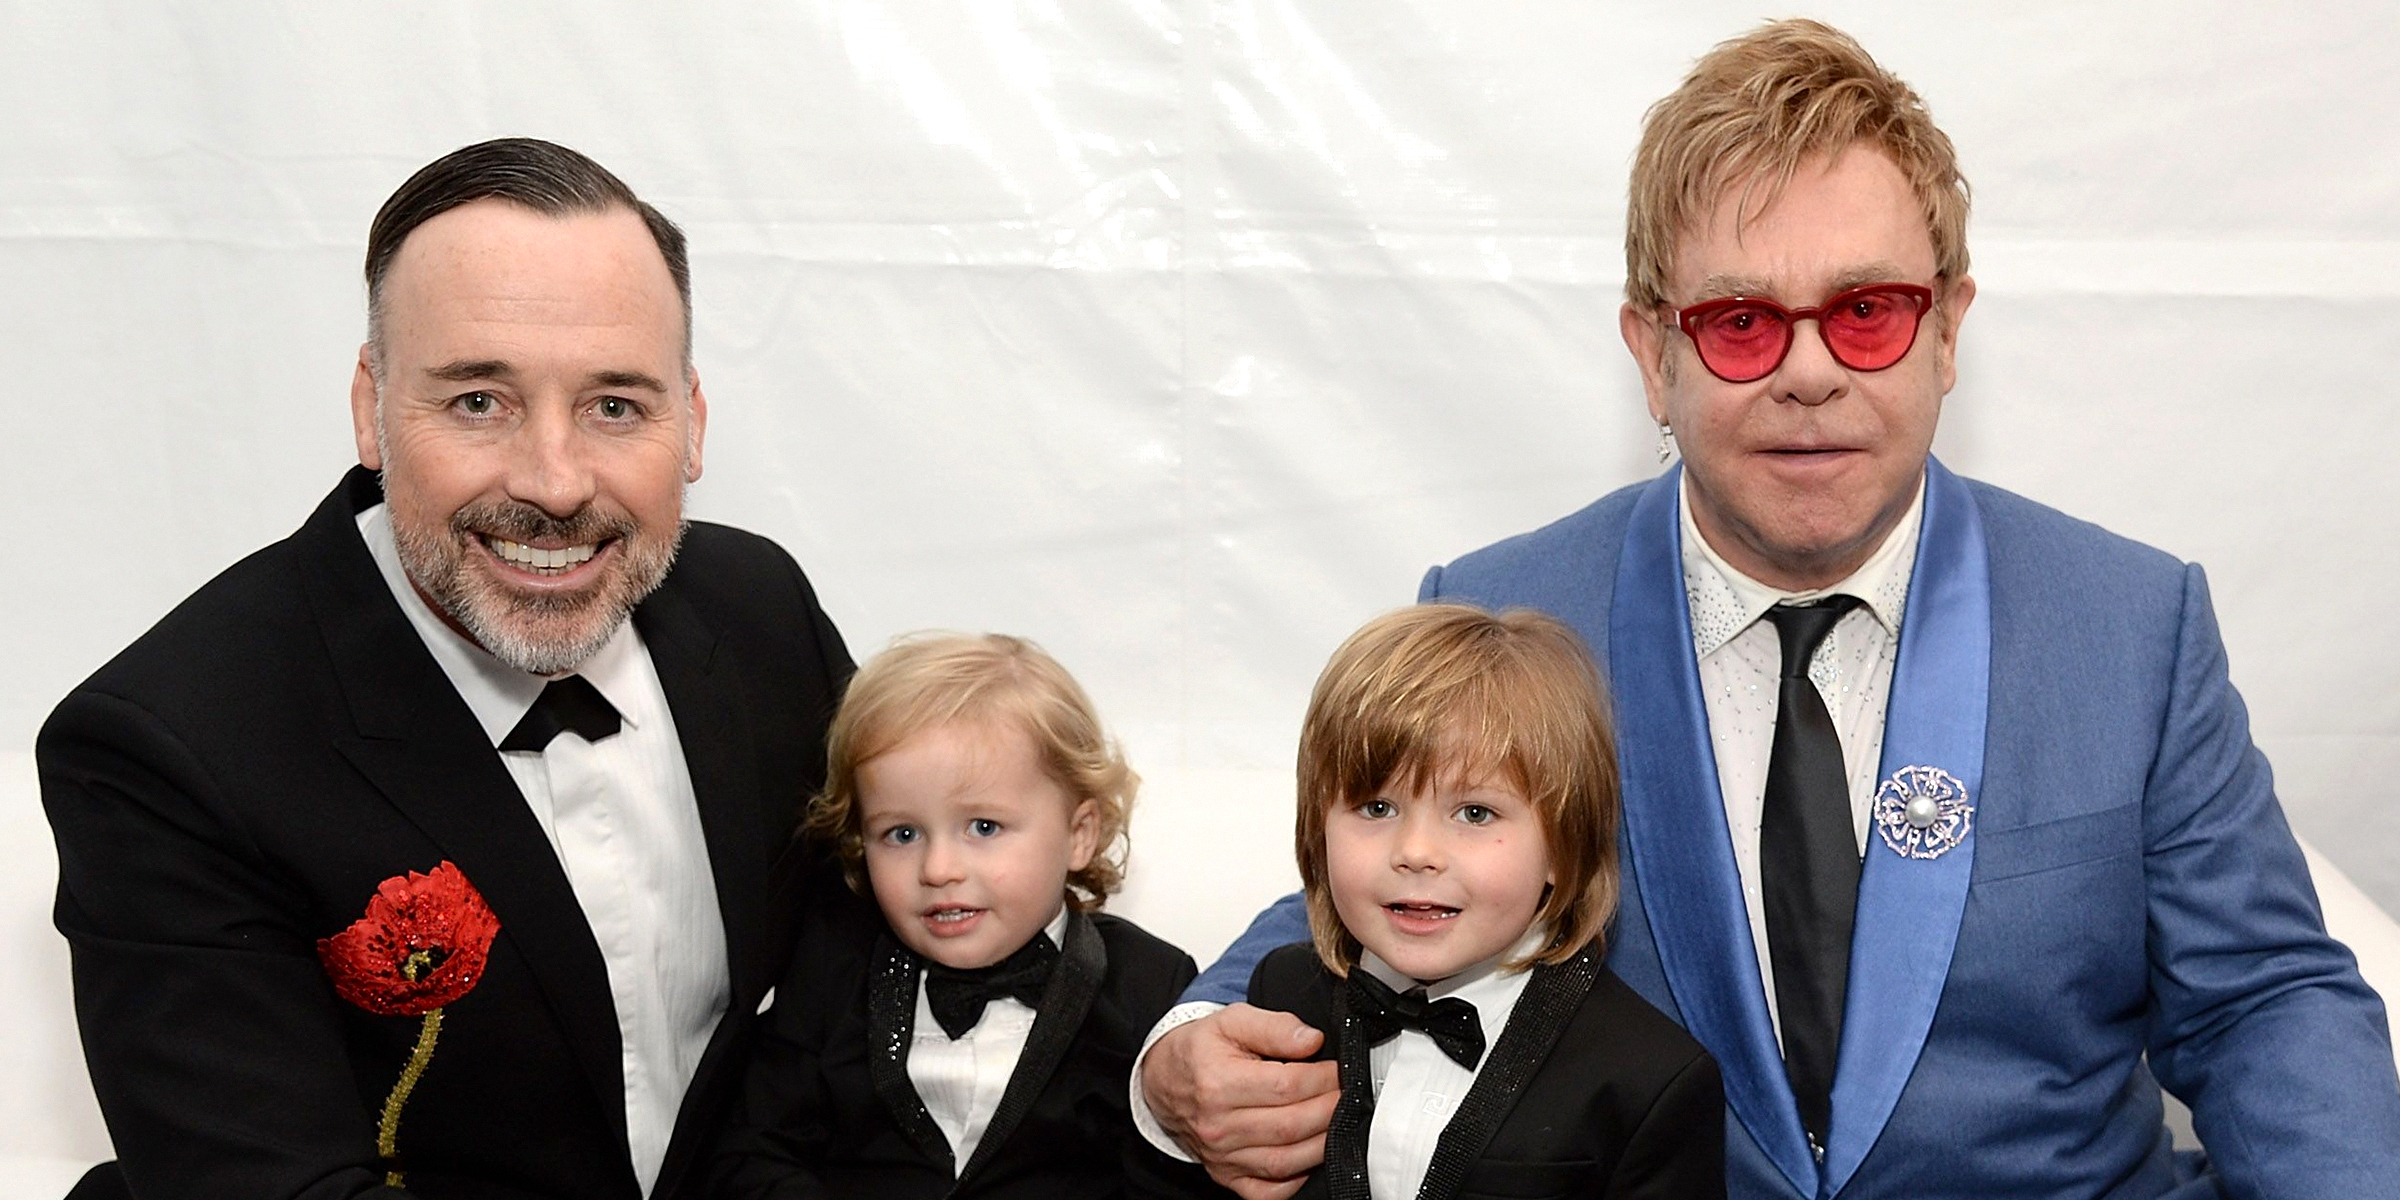 (L-R) David Furnish, Elijah Furnish-John, Zachary Furnish-John, and Sir Elton John attend the 23rd Annual Elton John AIDS Foundation Academy Awards Viewing Party on February 22, 2015, in Los Angeles, California. | Source: Getty Images